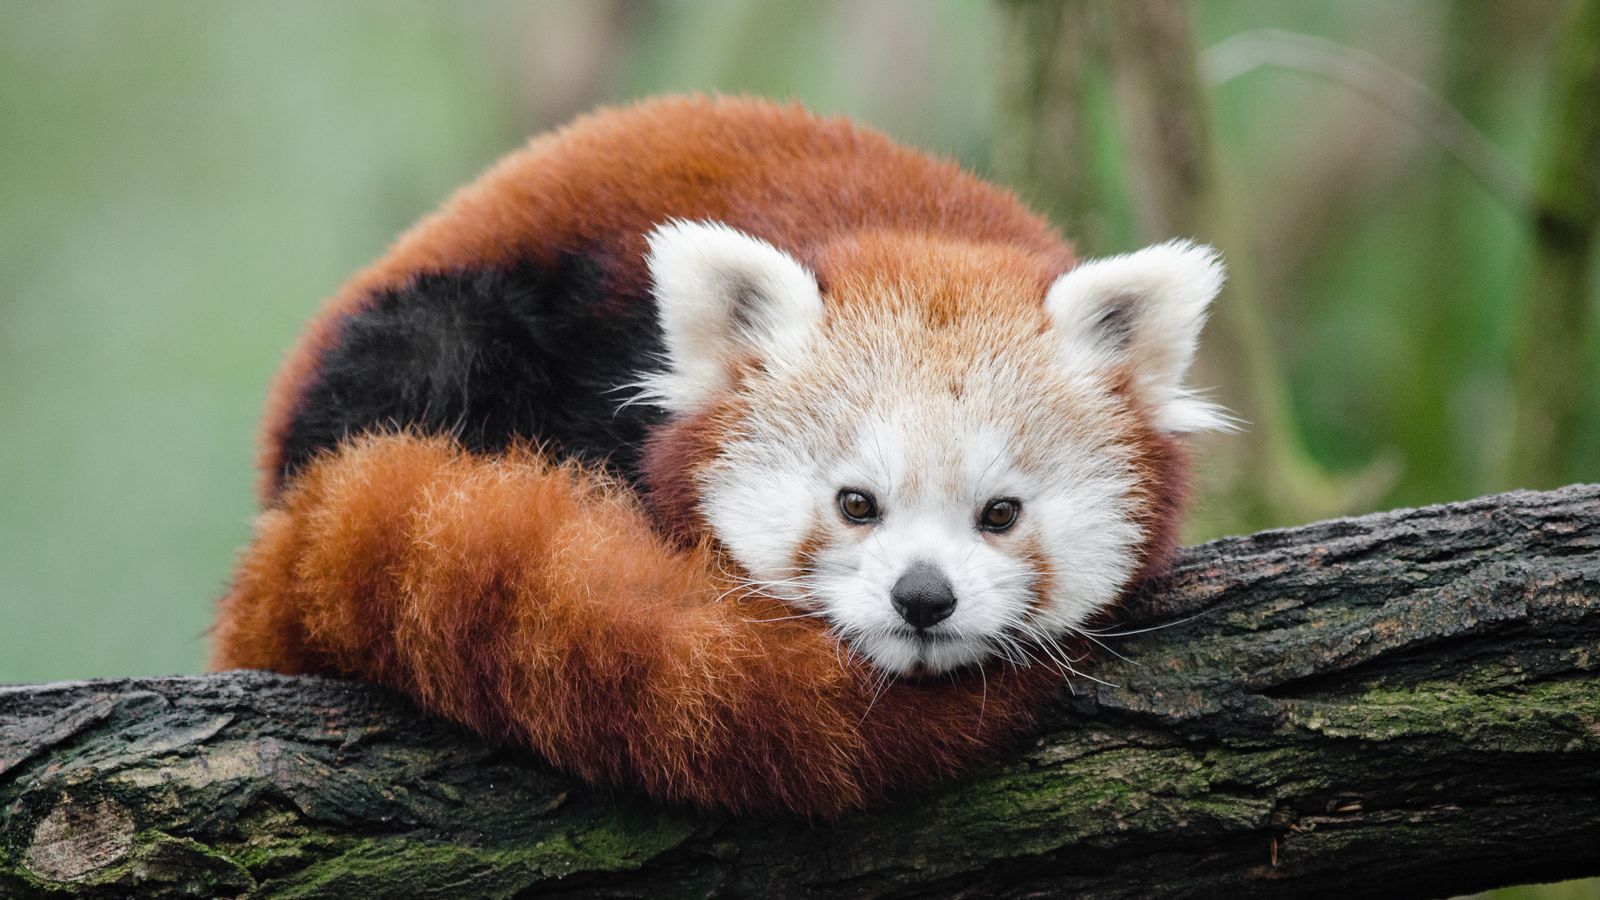 The Verge Review of Animals: the red panda